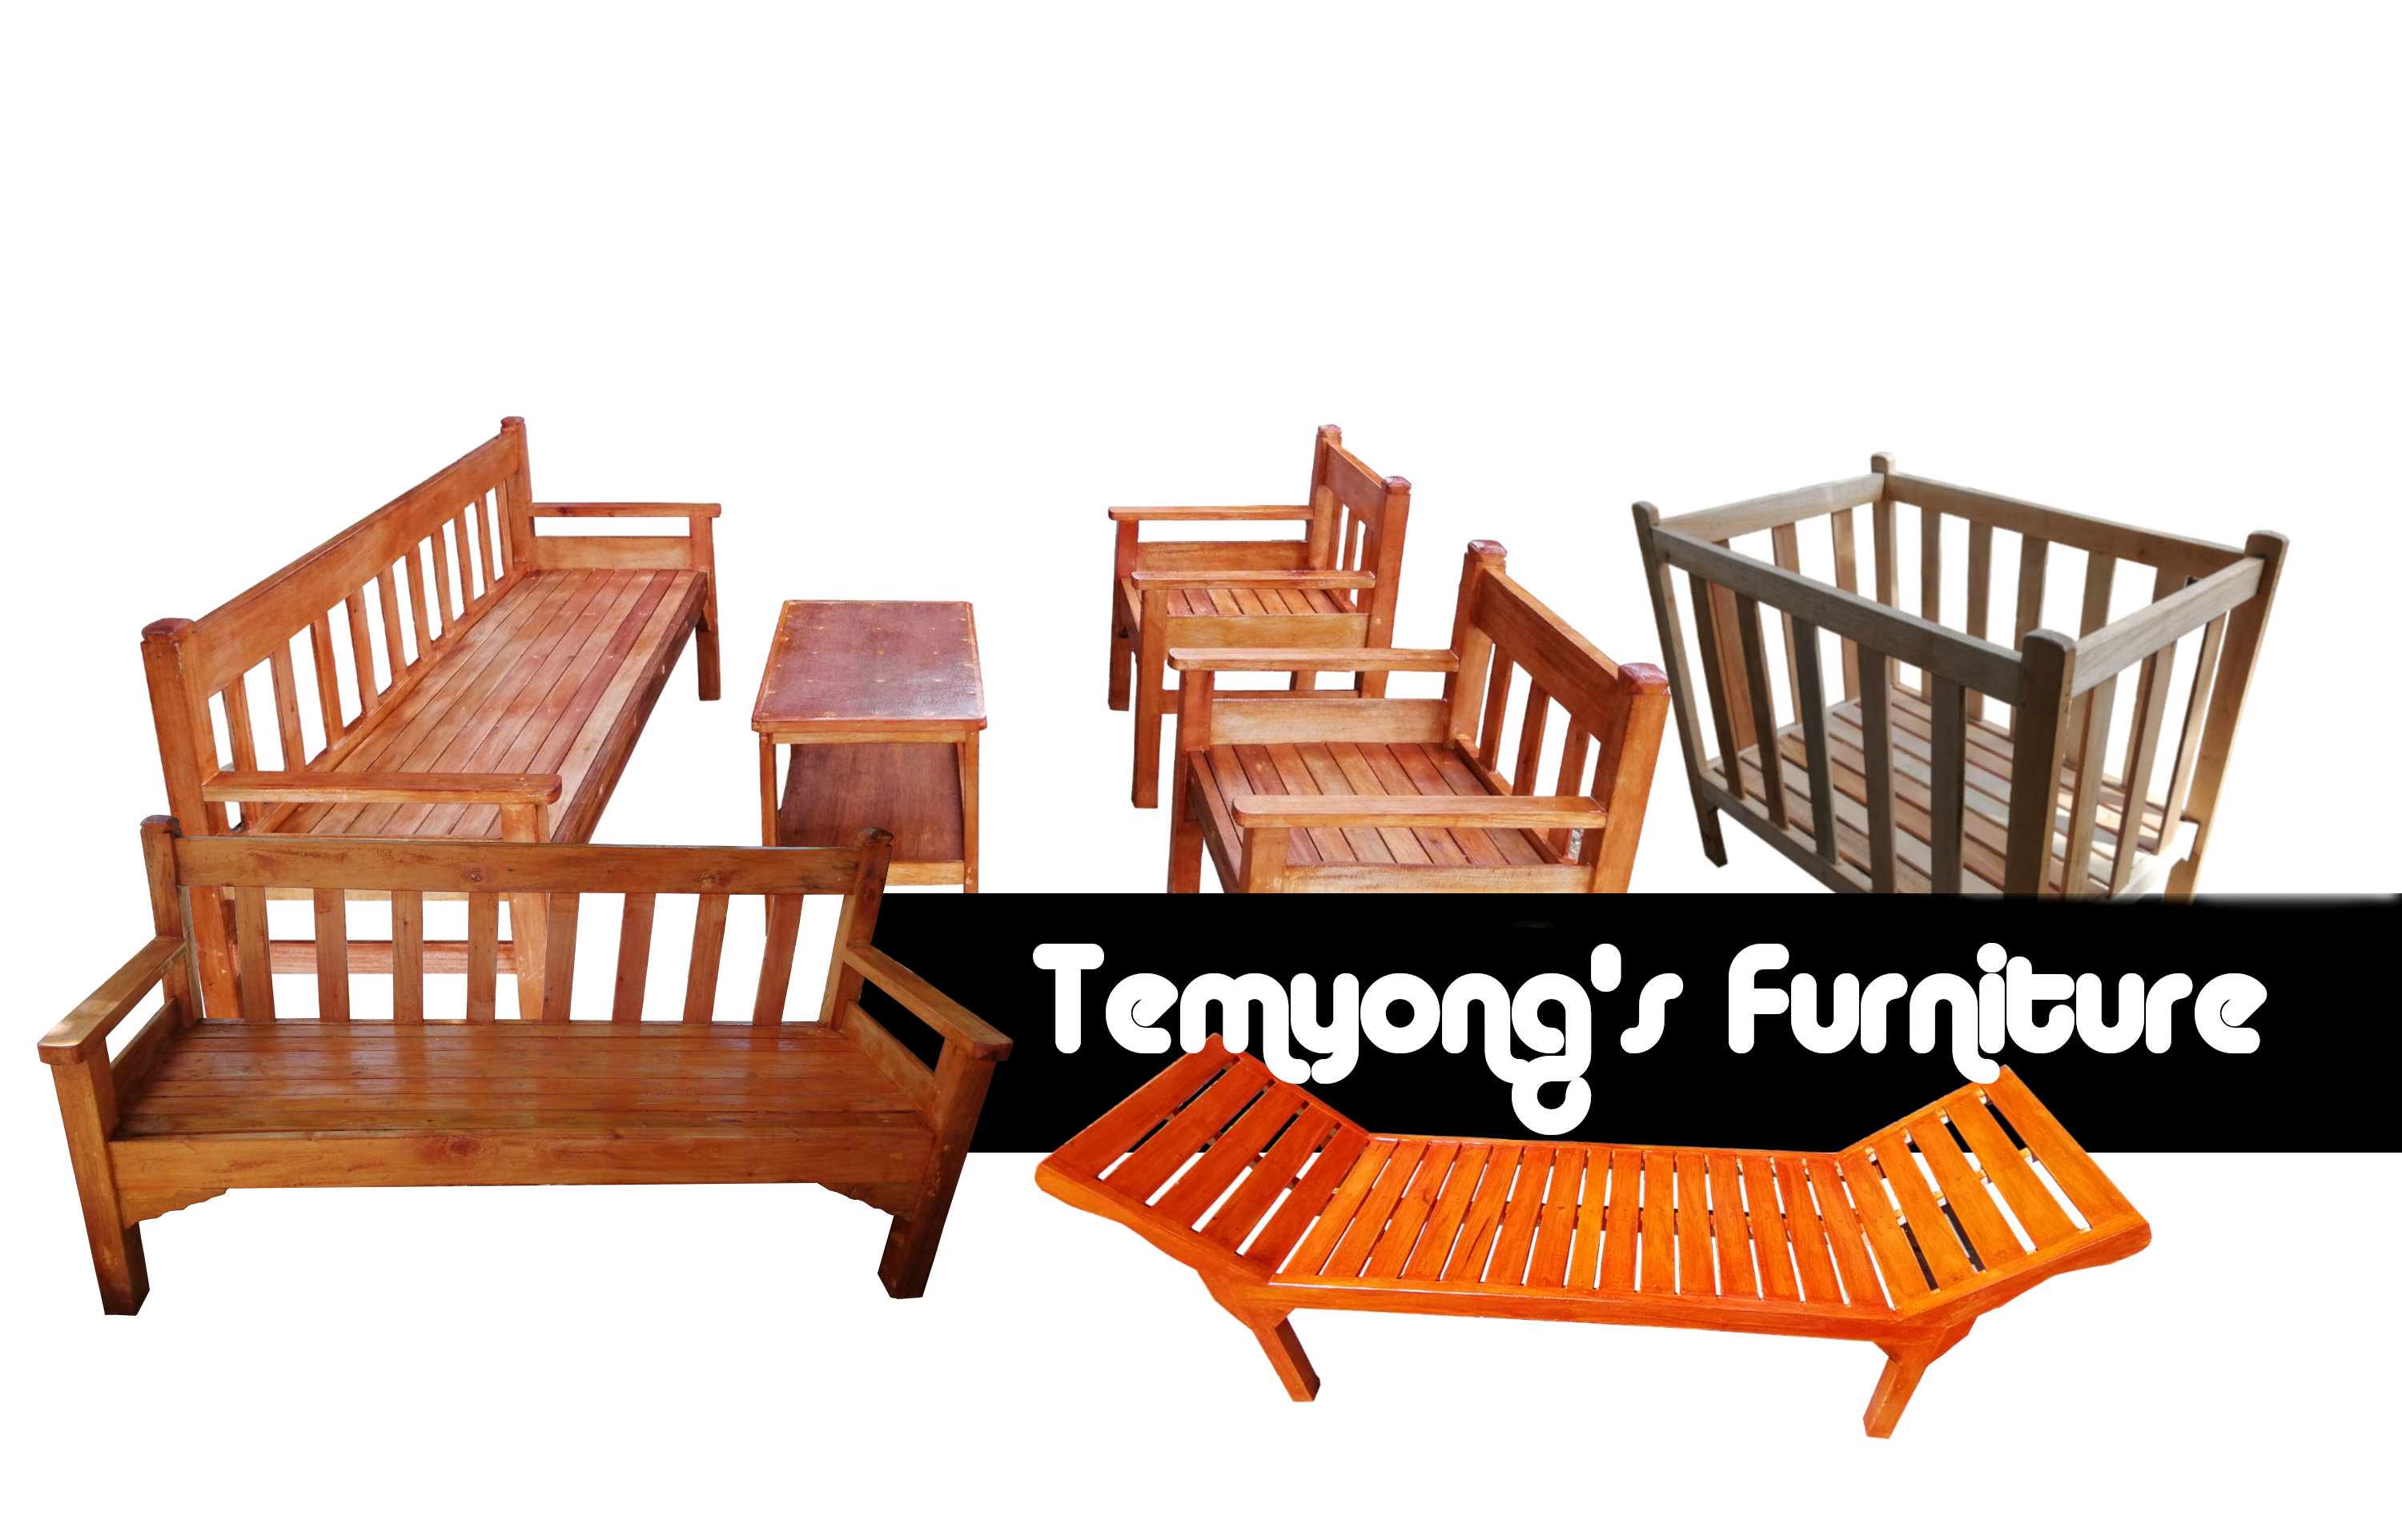 We customized home wooded furnitures, such as  Sala Set, Baby Crib, Double Deck, Wooden Bed and All are affordable and can be negotiable